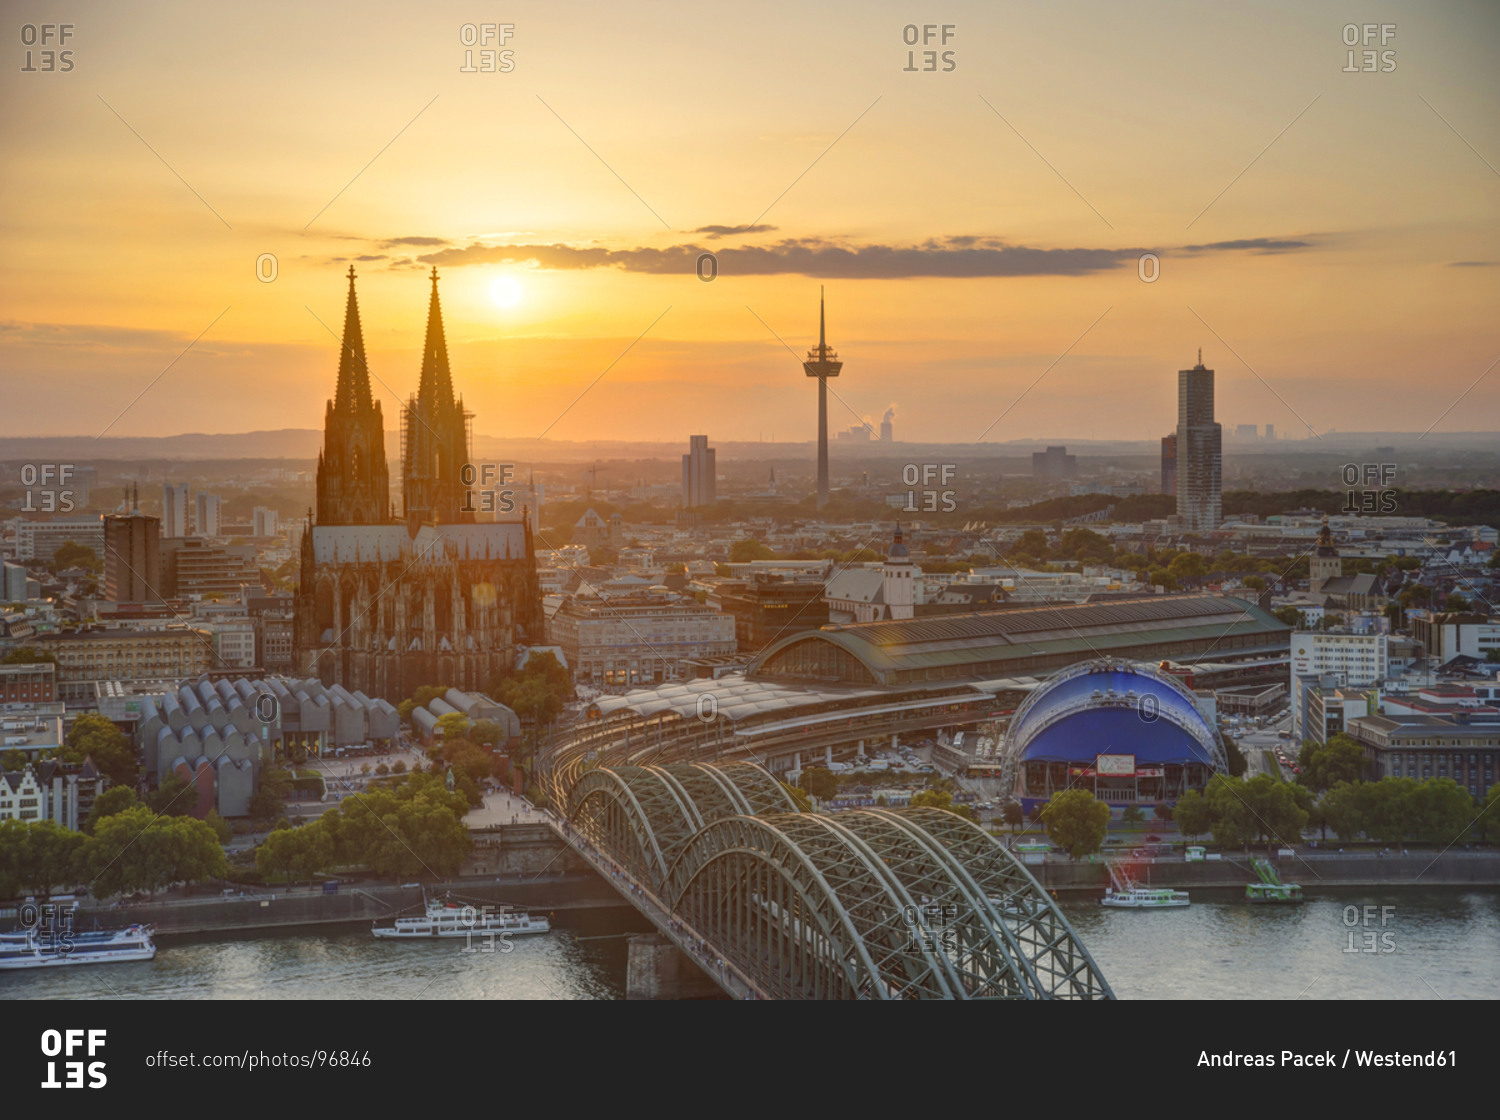 Germany, North Rhine-Westphalia, Cologne, city view with Cologne Cathedral and Colonius at evening twilight